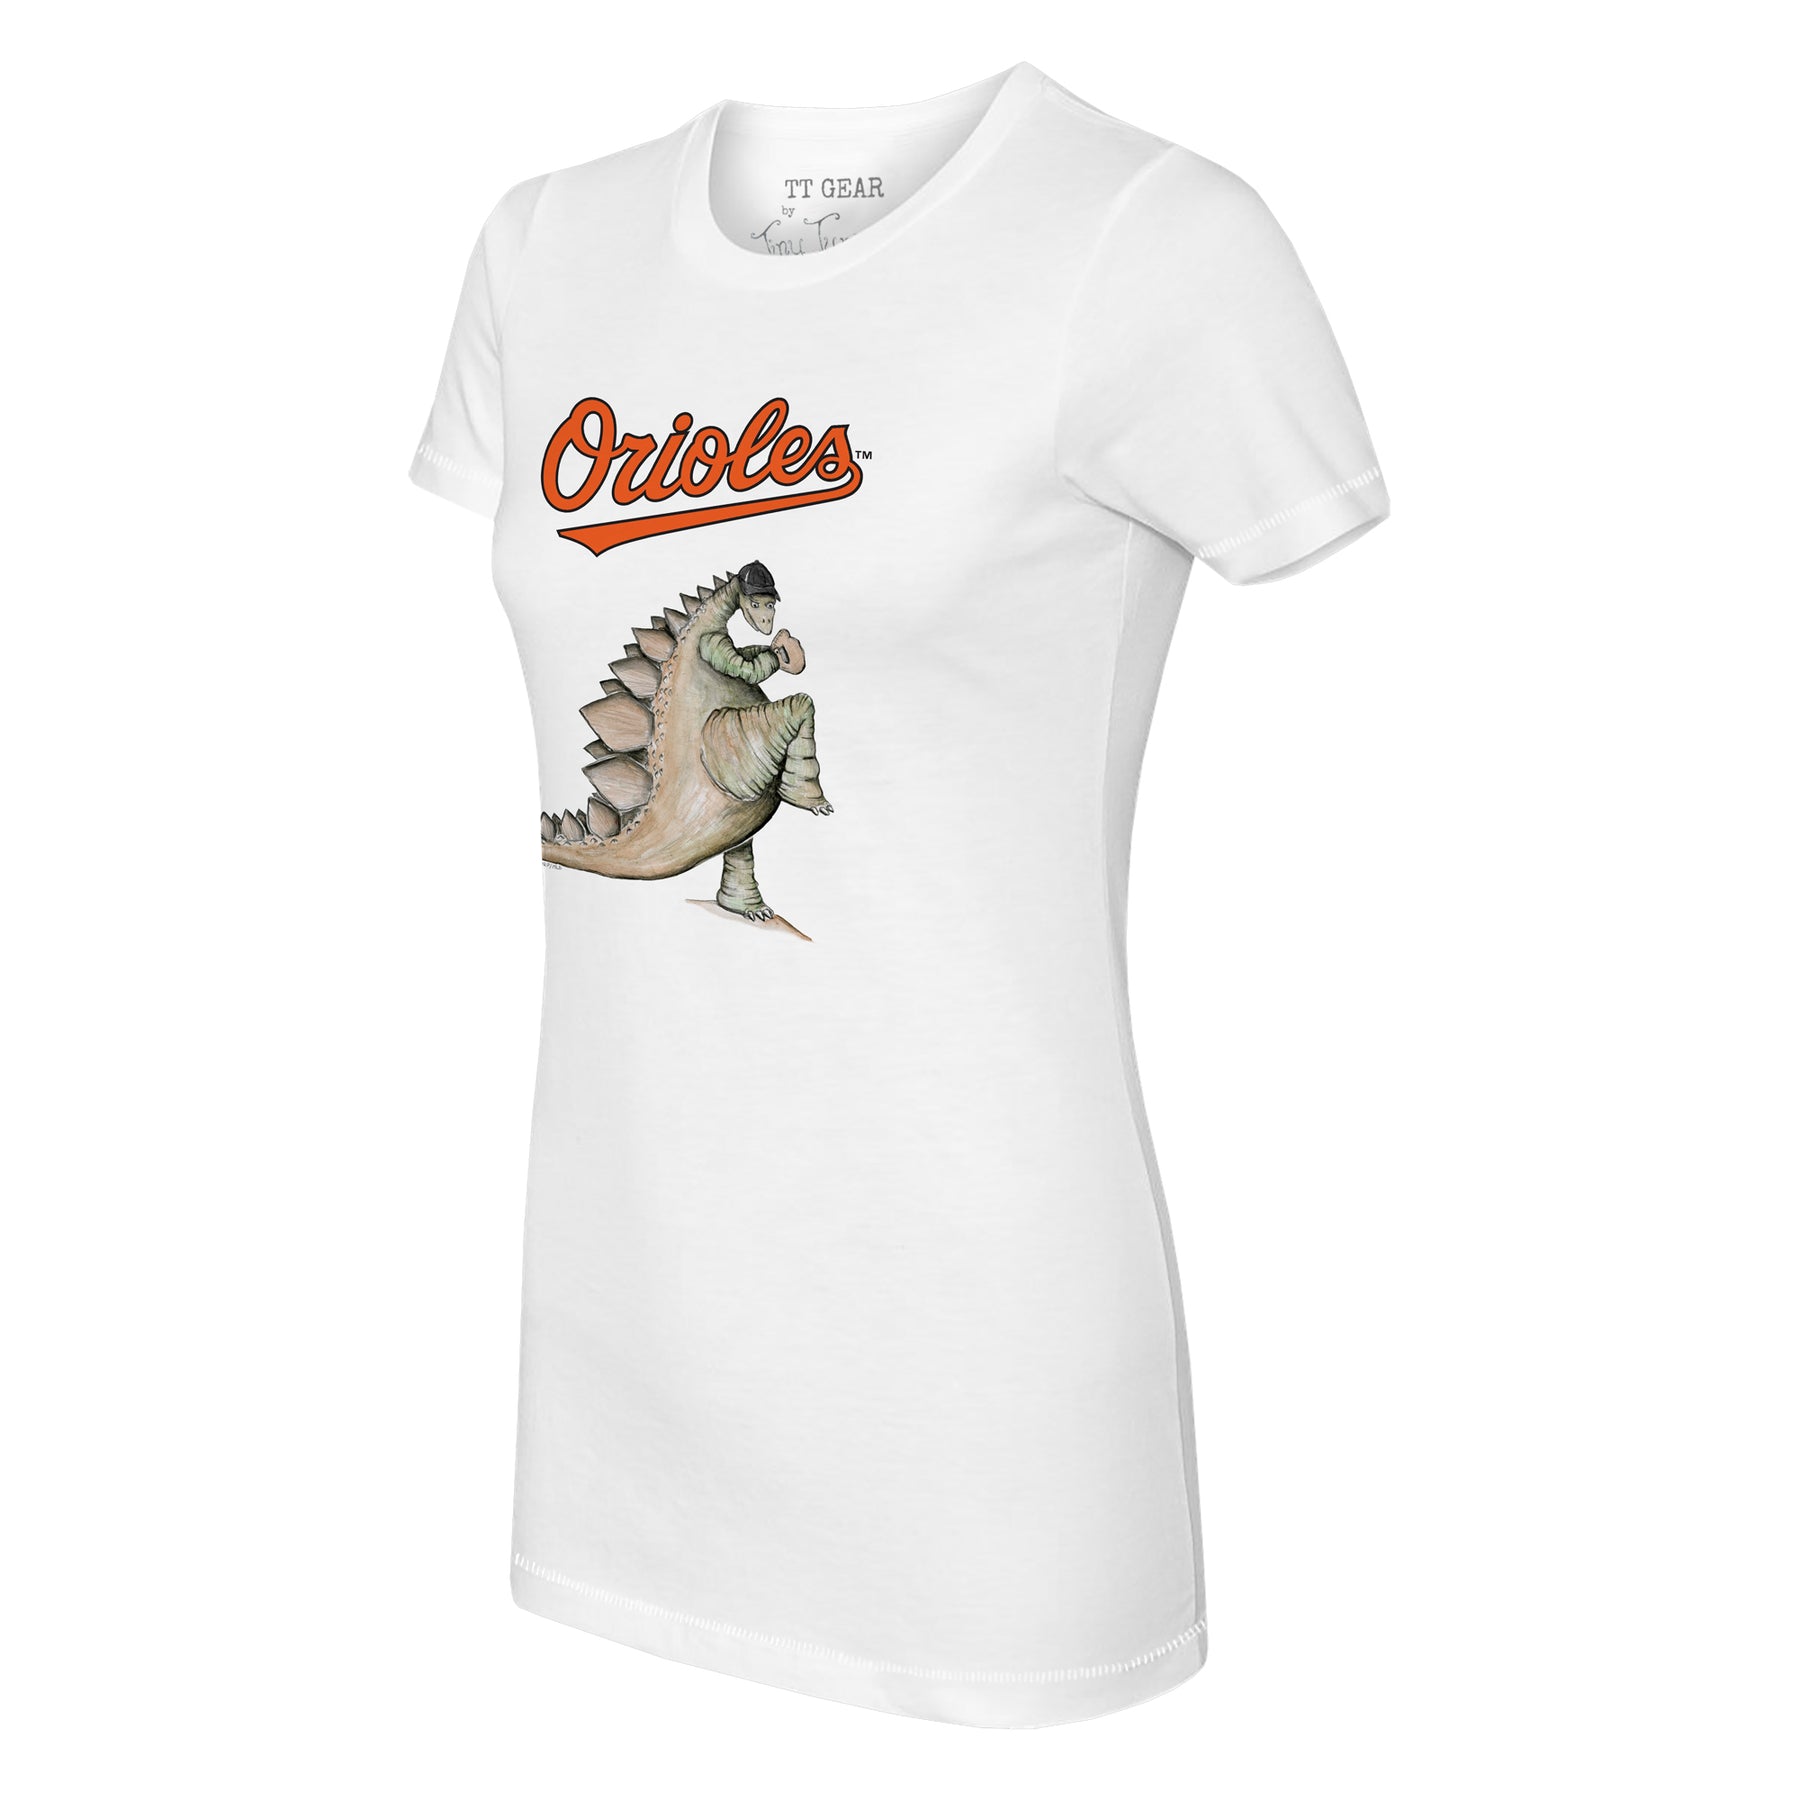 New Official MLB Baltimore Orioles Womens Soft Orange Sparkle